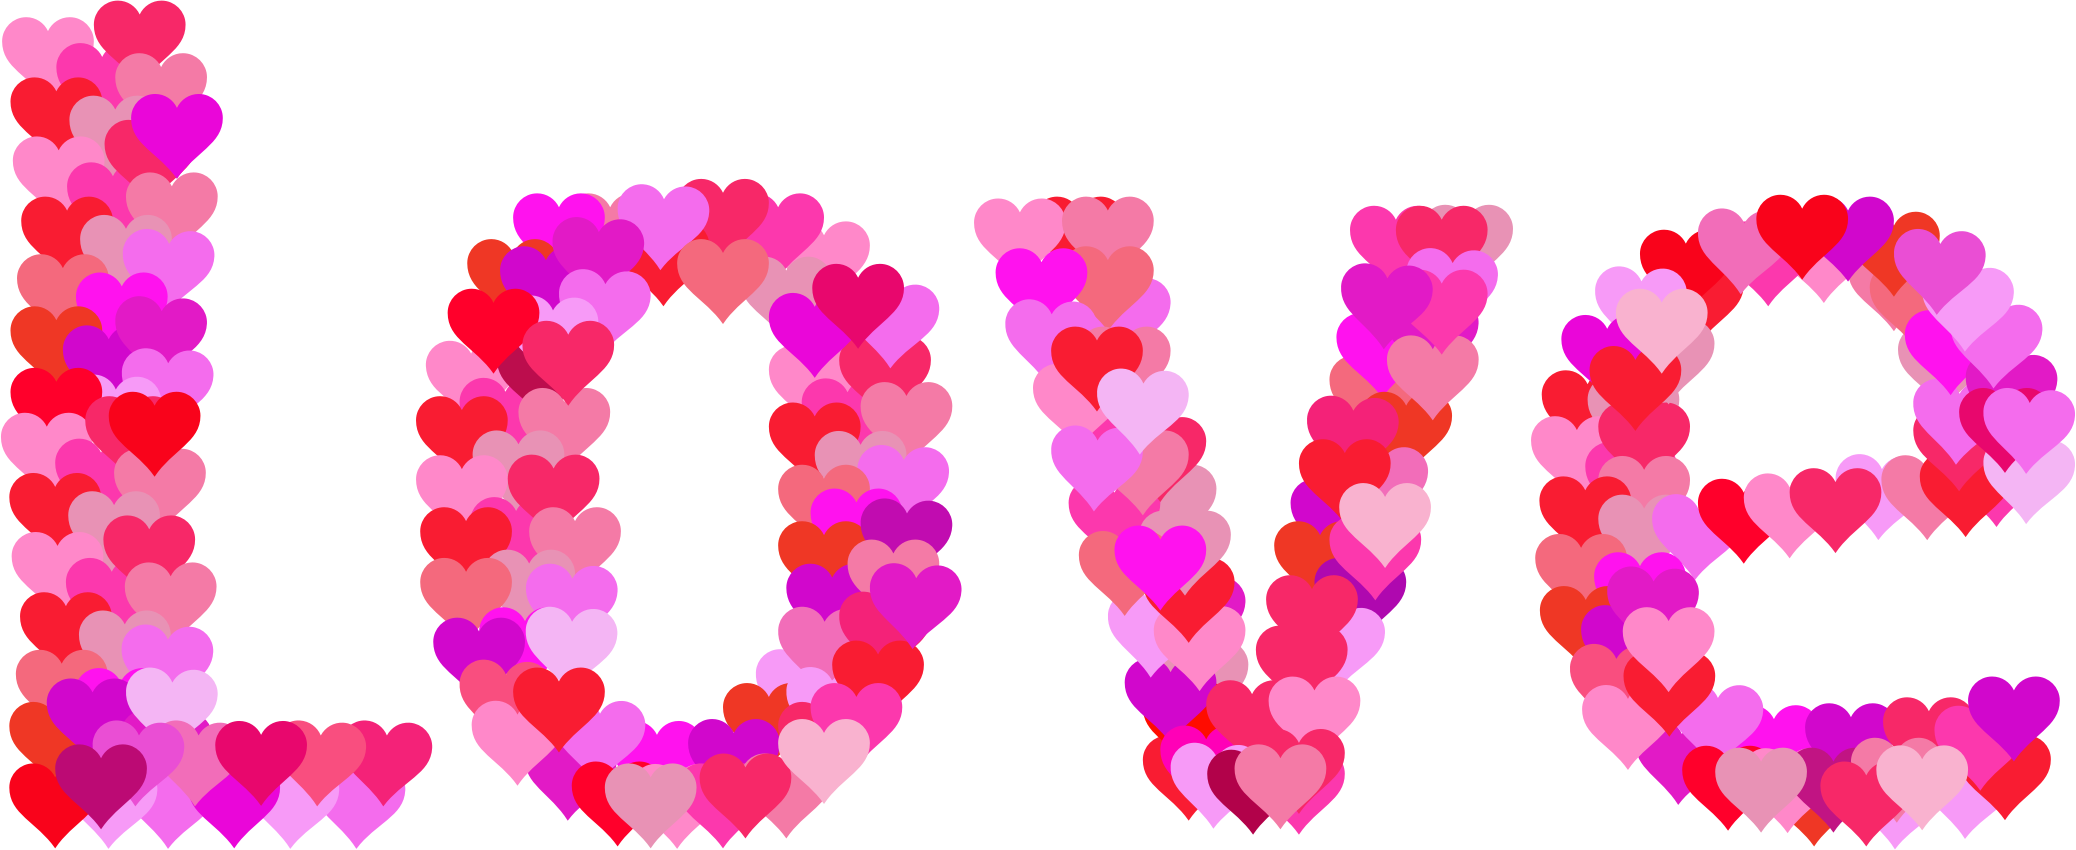 Love-Heart-Typography.png